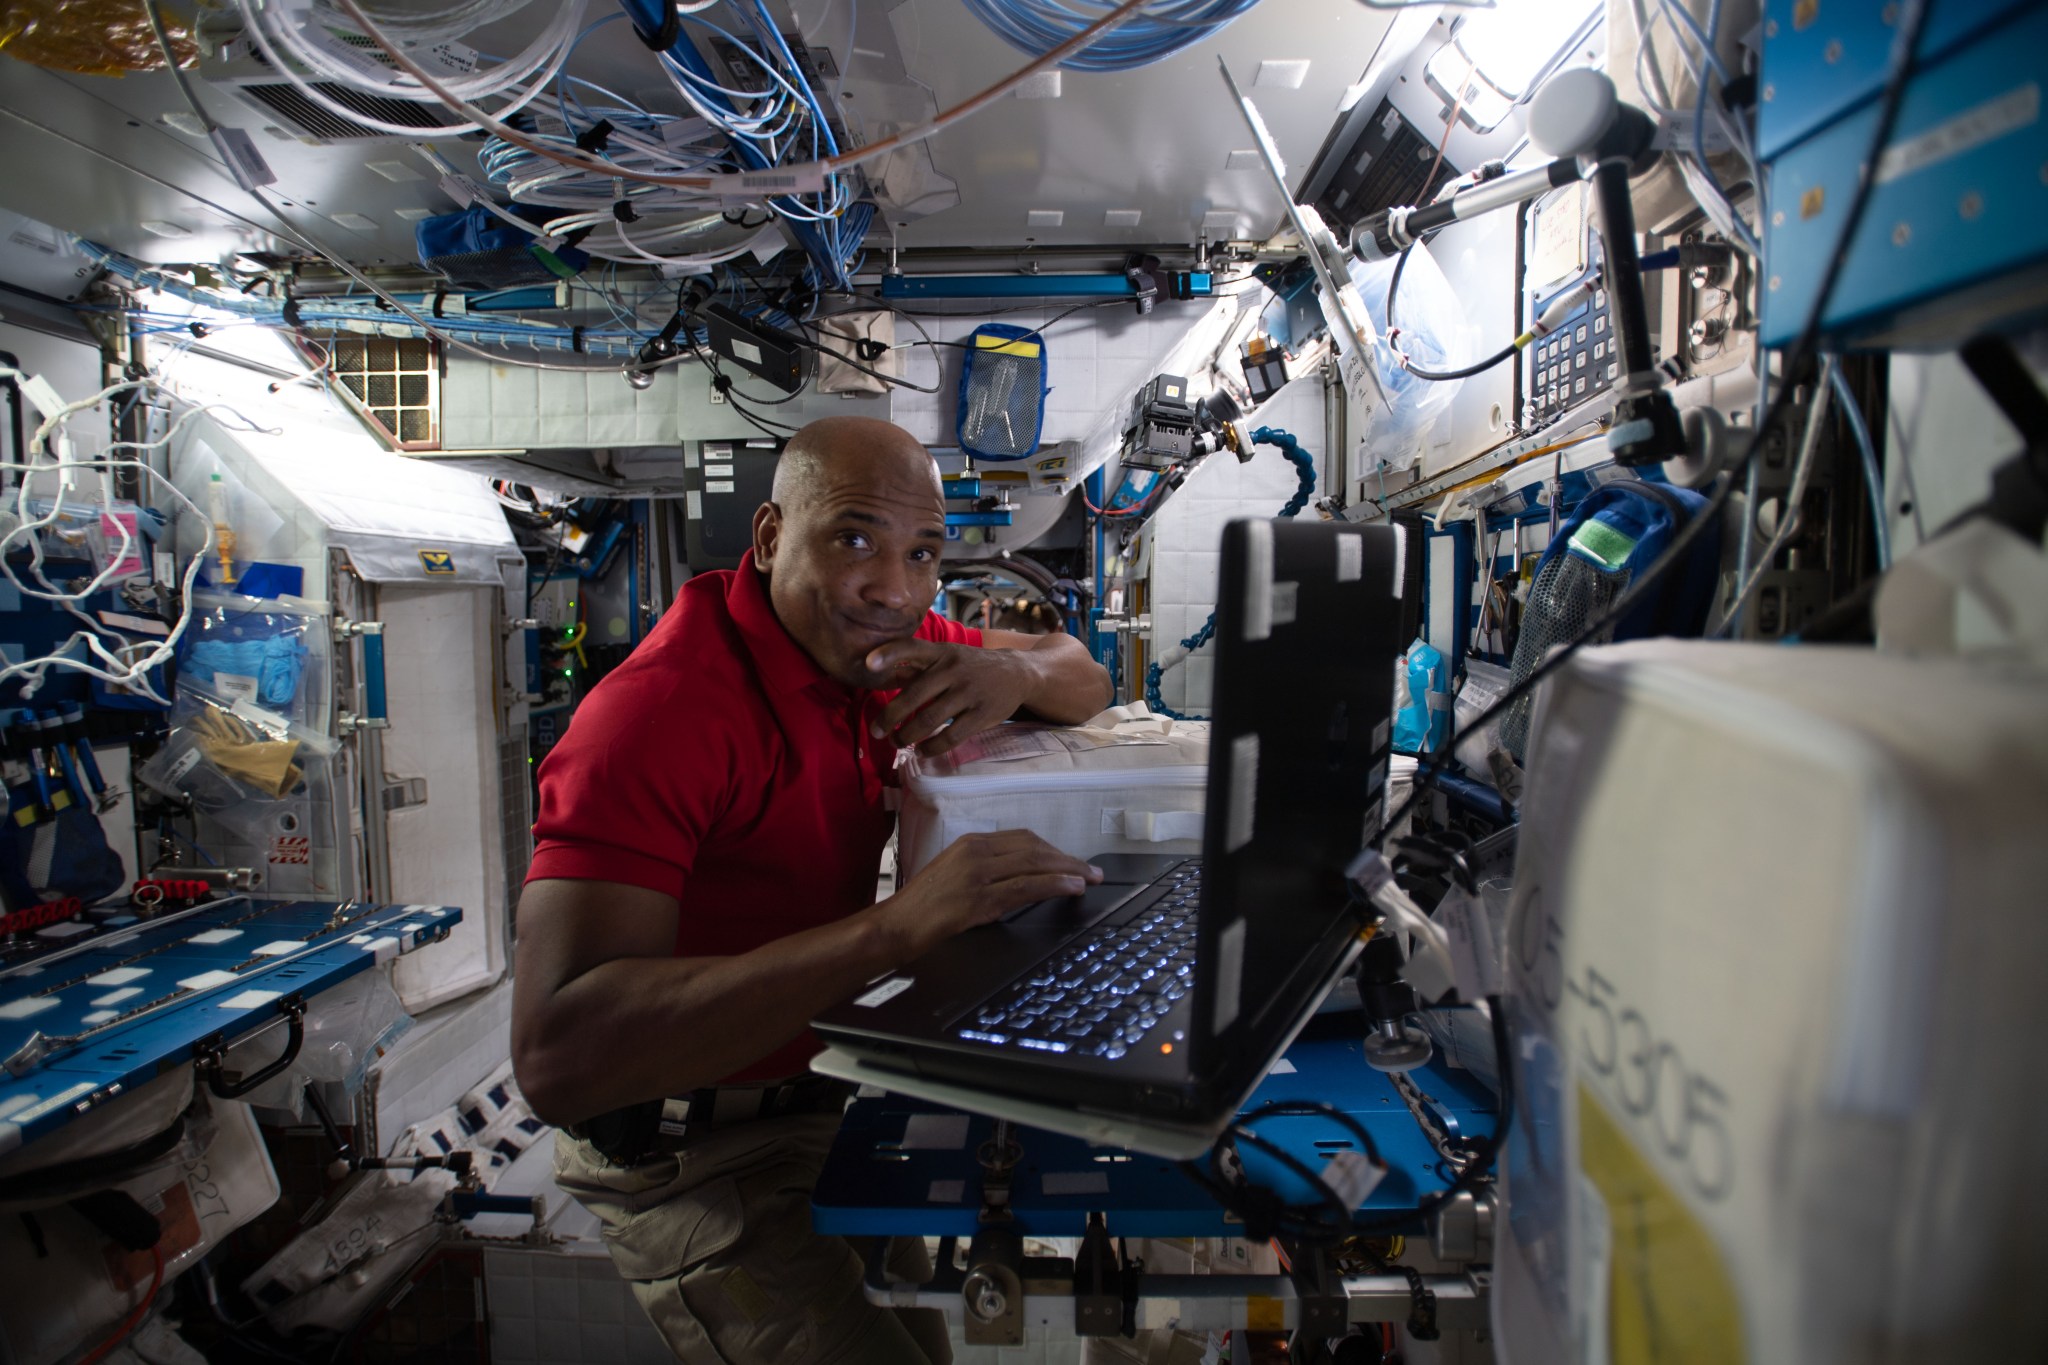 NASA astronaut and Expedition 64 Flight Engineer Victor Glover reviews procedures on a computer for the Monoclonal Antibodies Protein Crystal Growth (PCG) experiment inside the Harmony module.